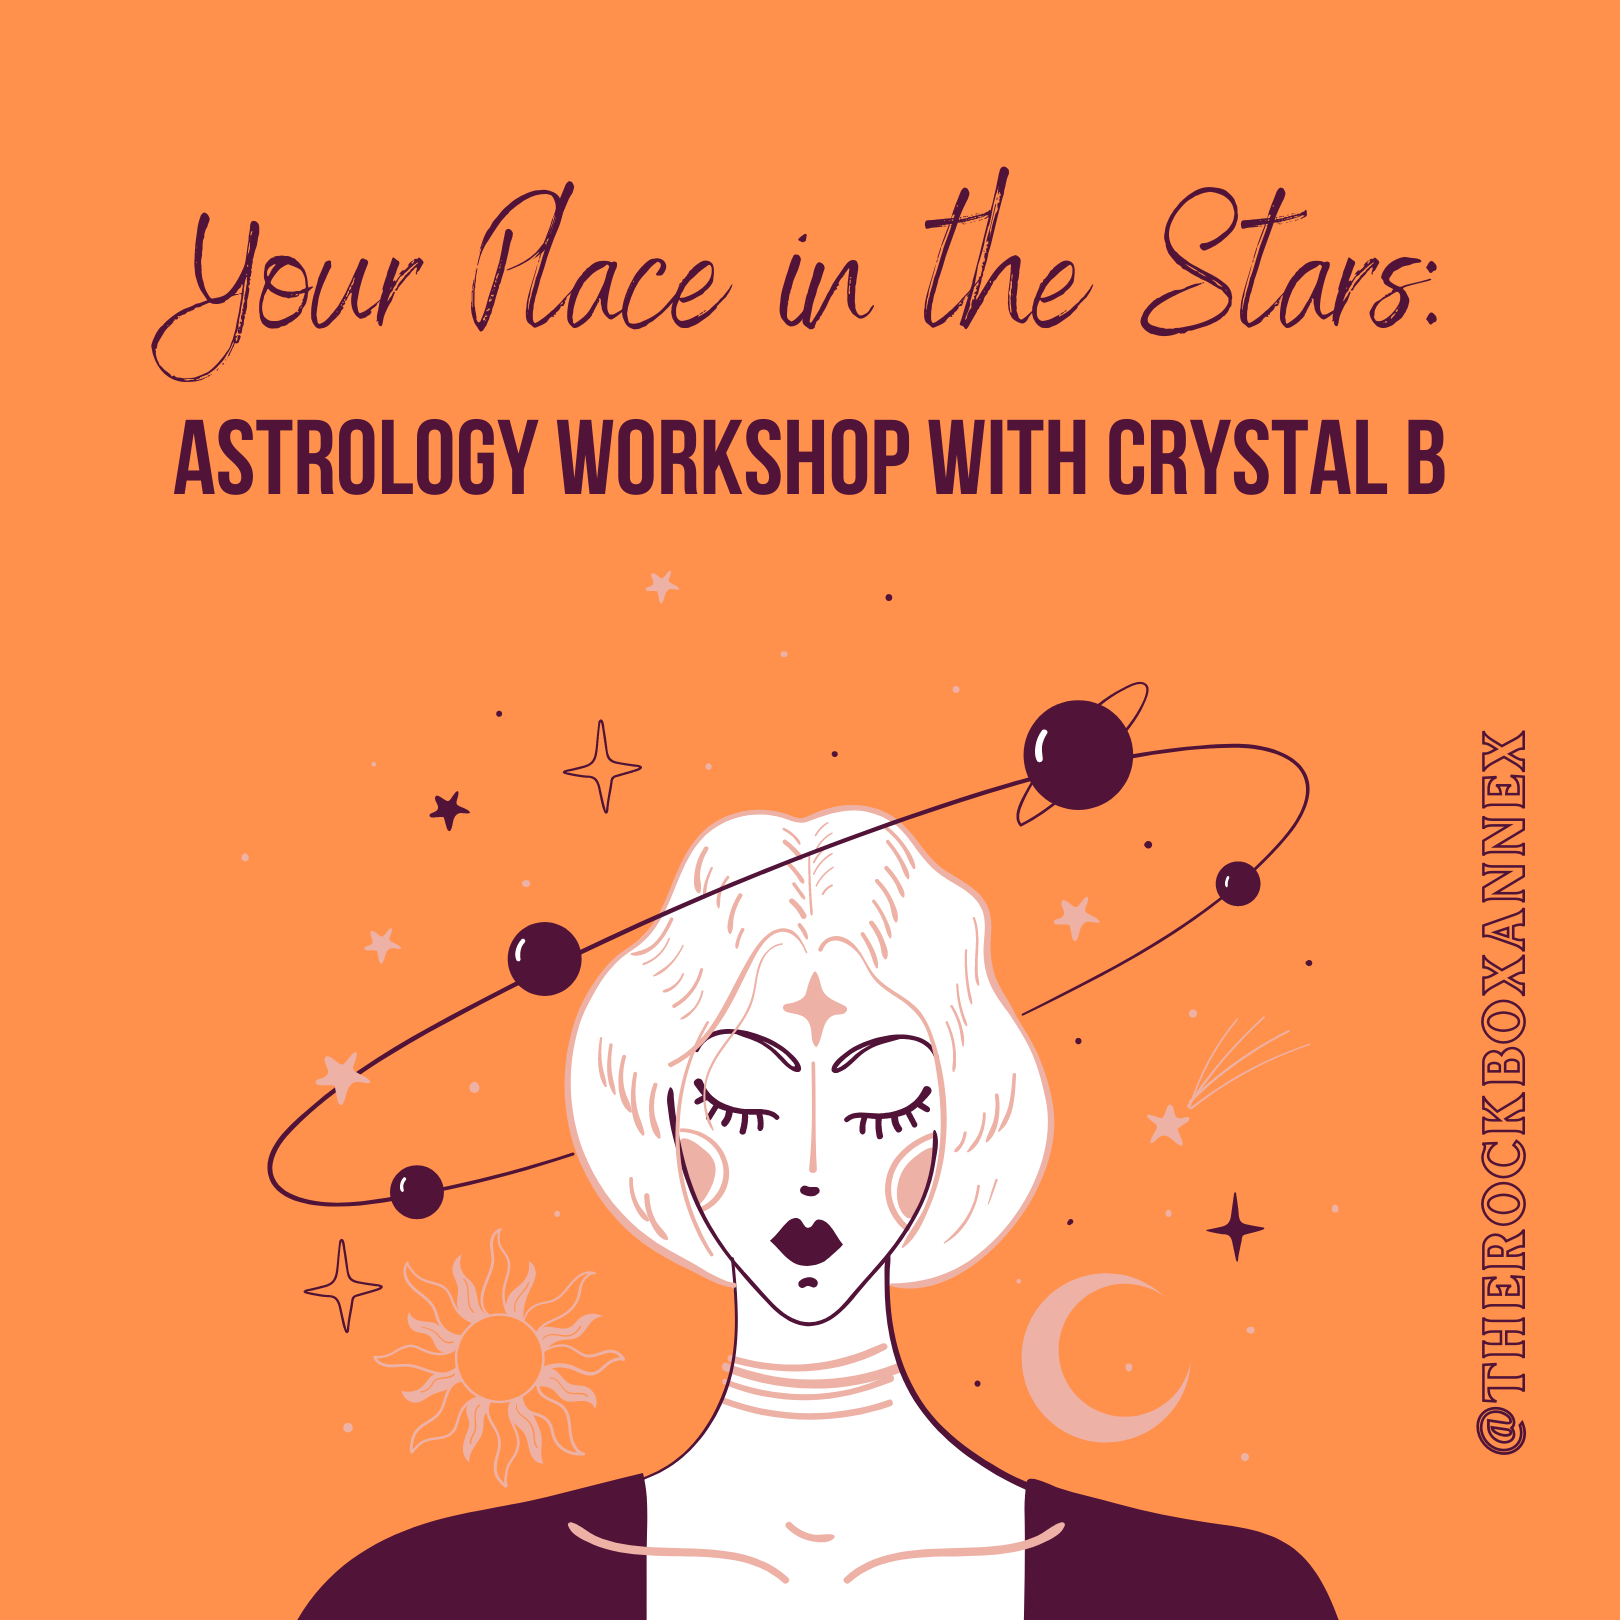 In Person Astrology Workshop Morristown NJ: Your Place in the Stars